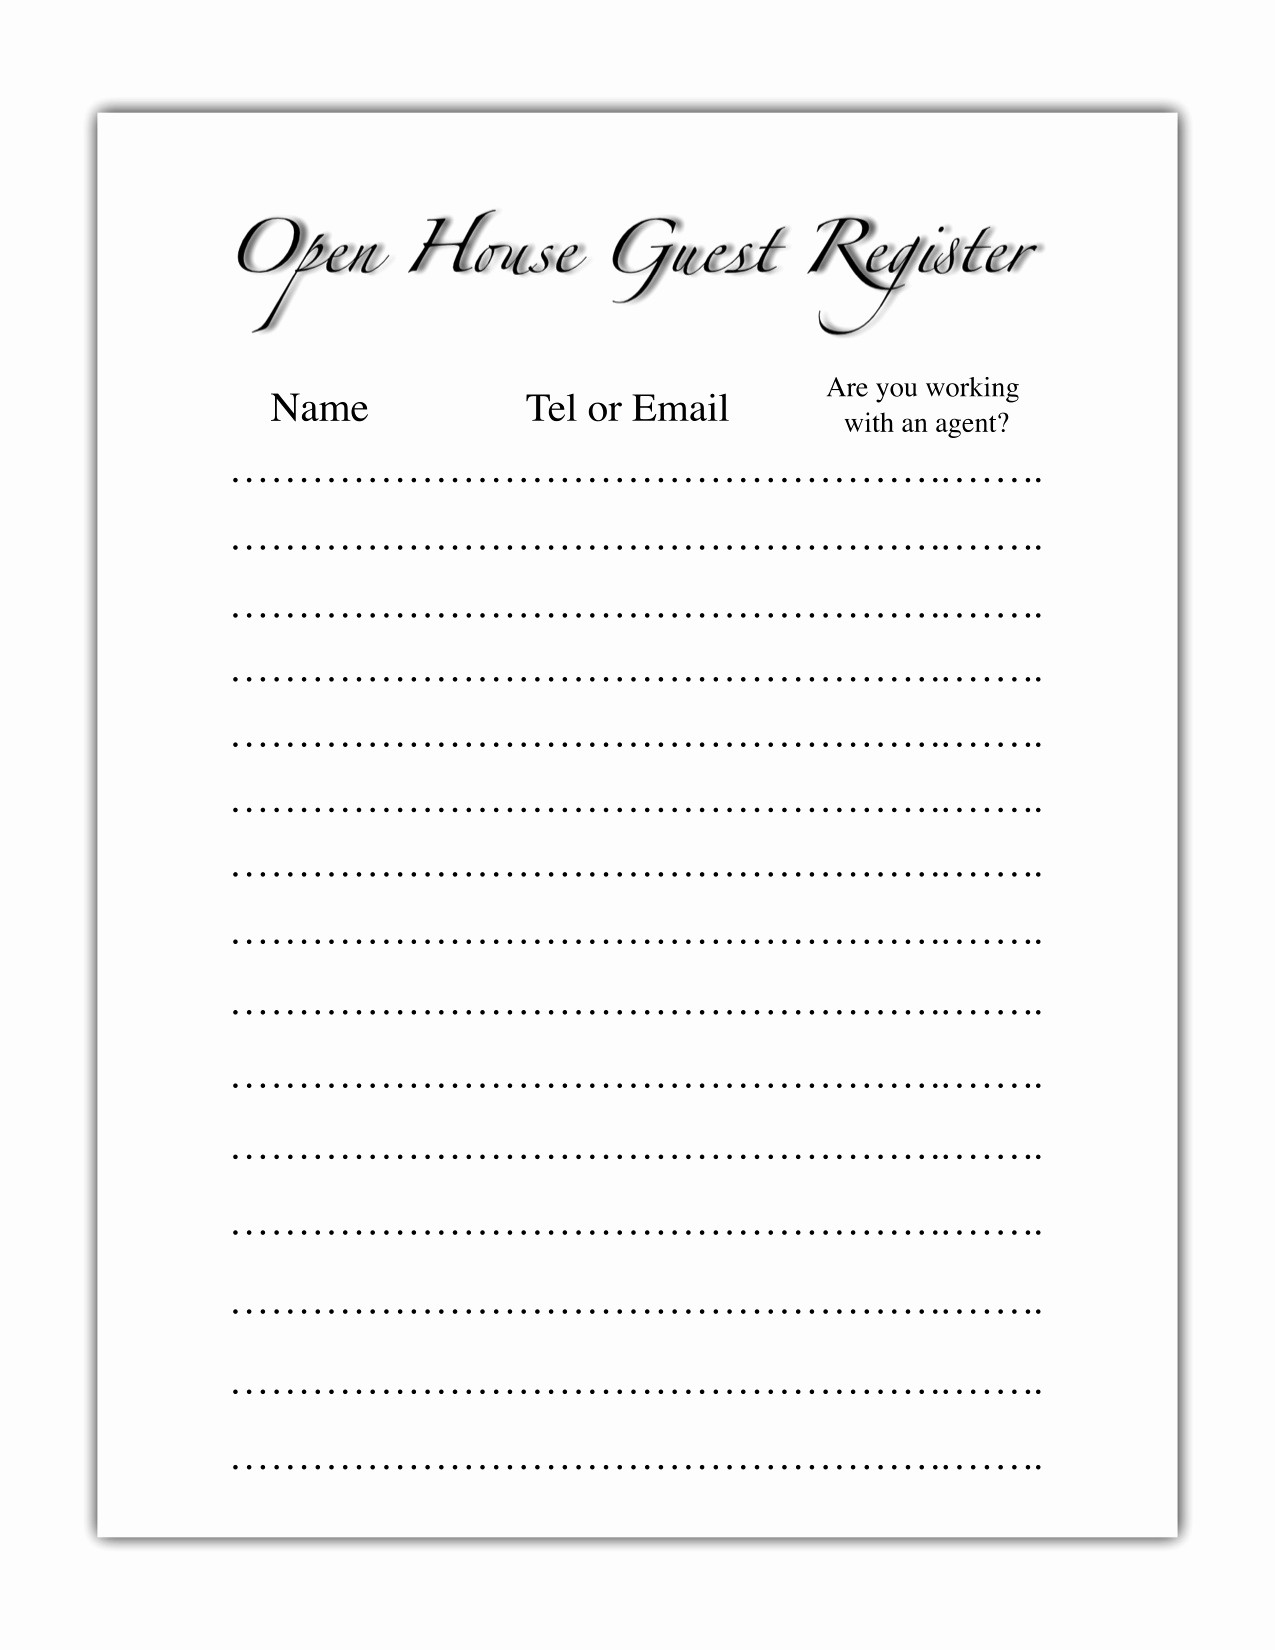 Guest Sign In Sheet Templates Fresh Open House Guest Register